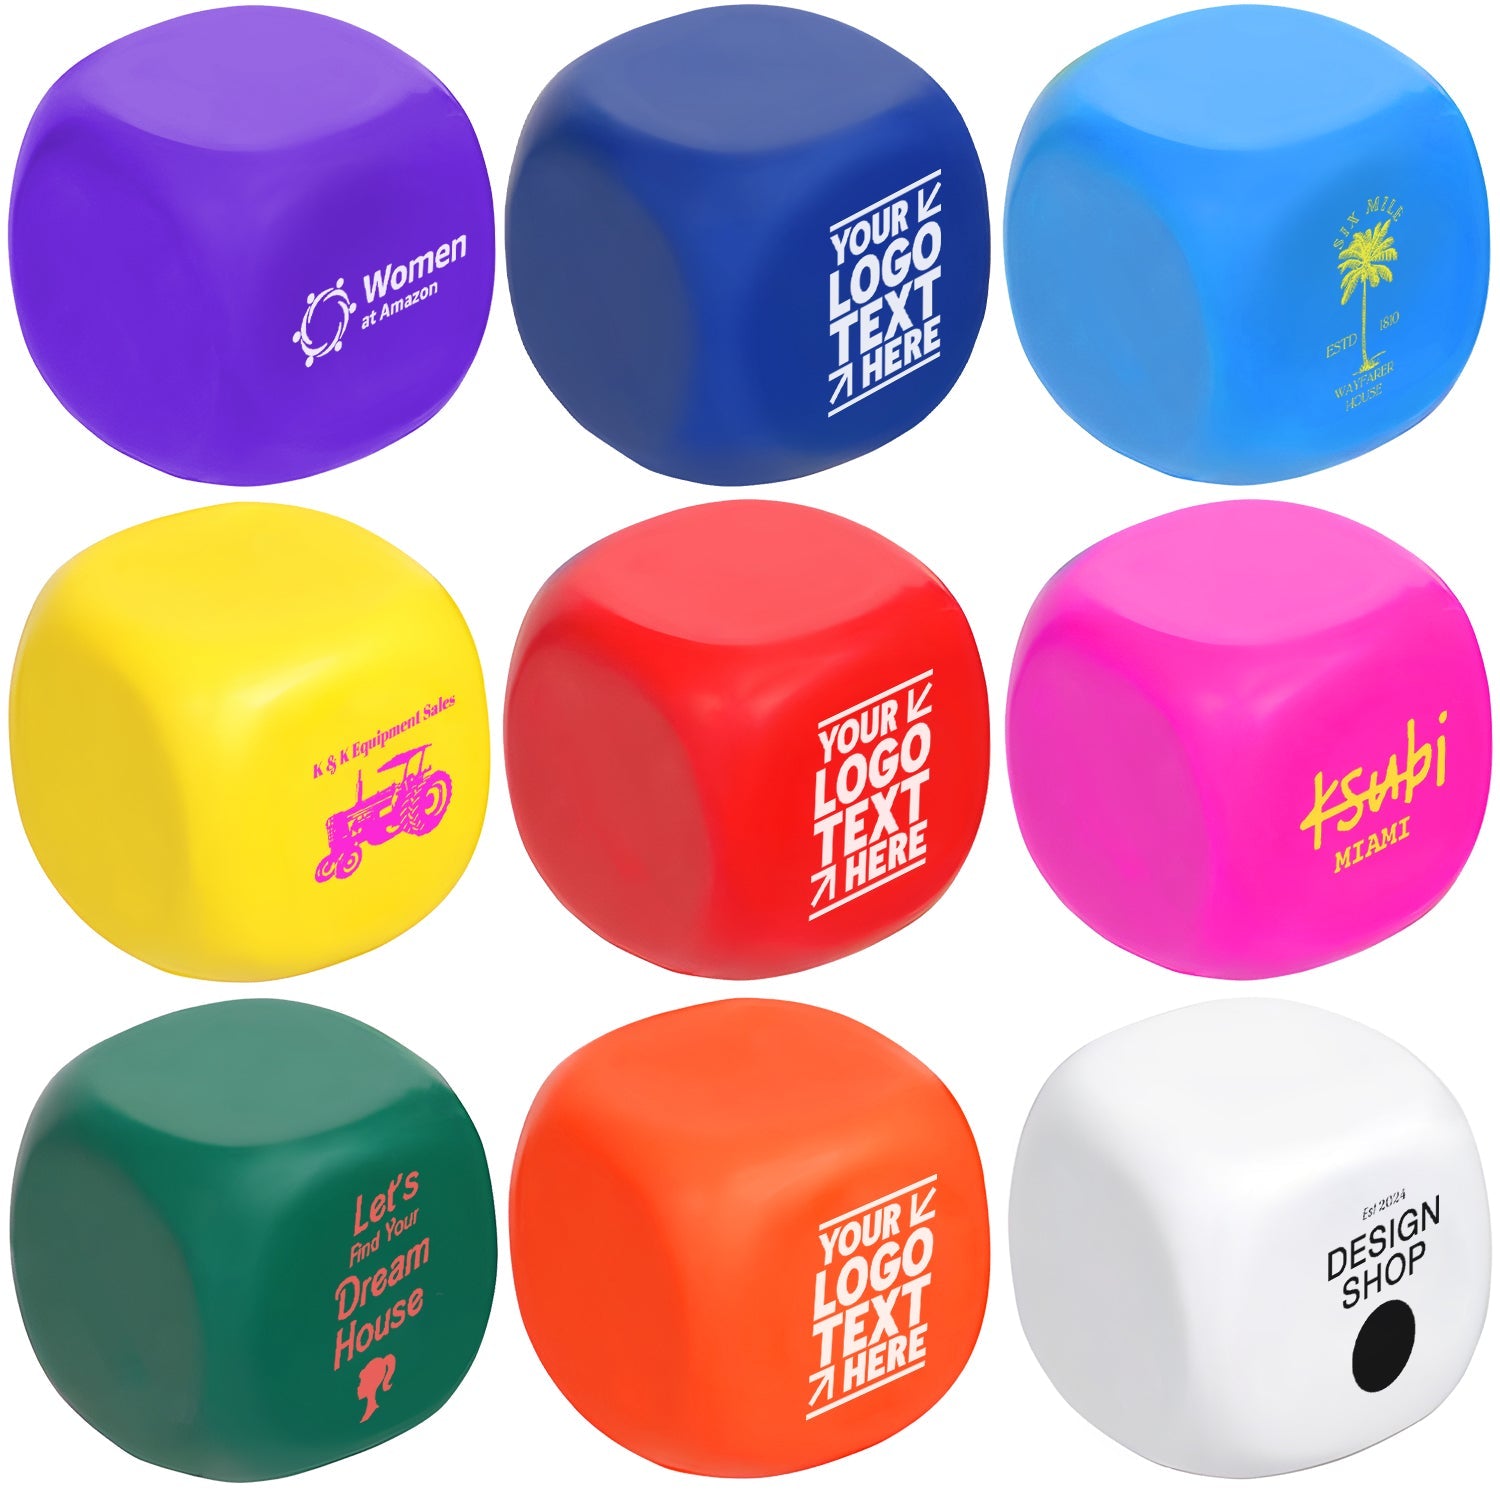 Personalized Printed Square Shaped Stress Relievers Balls Stress Toys